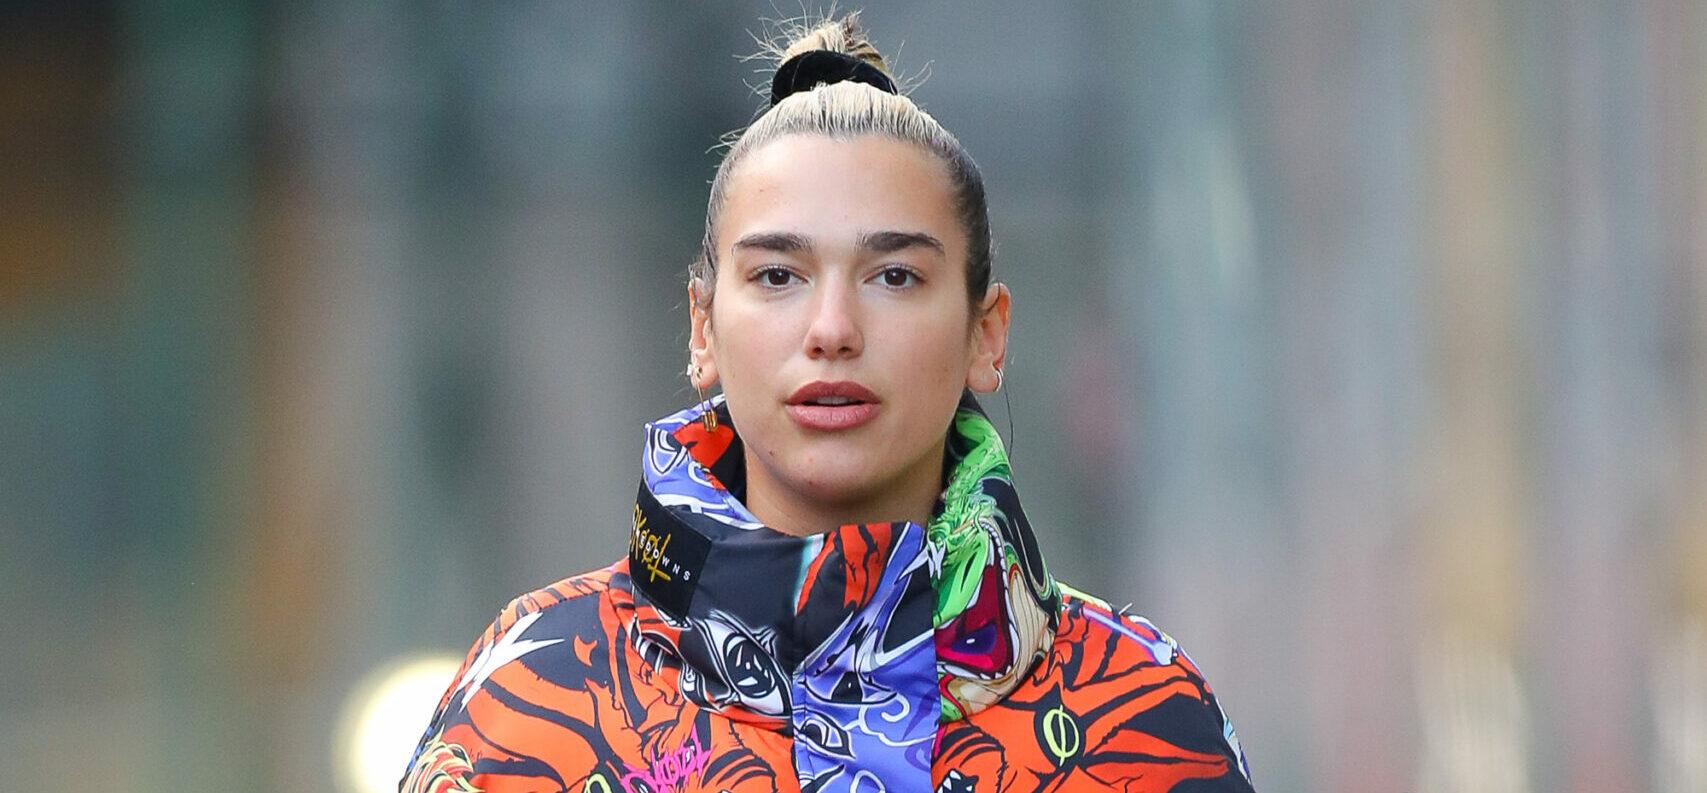 Dua Lipa sips into her water while walking around in NYC on Jan 10 2020